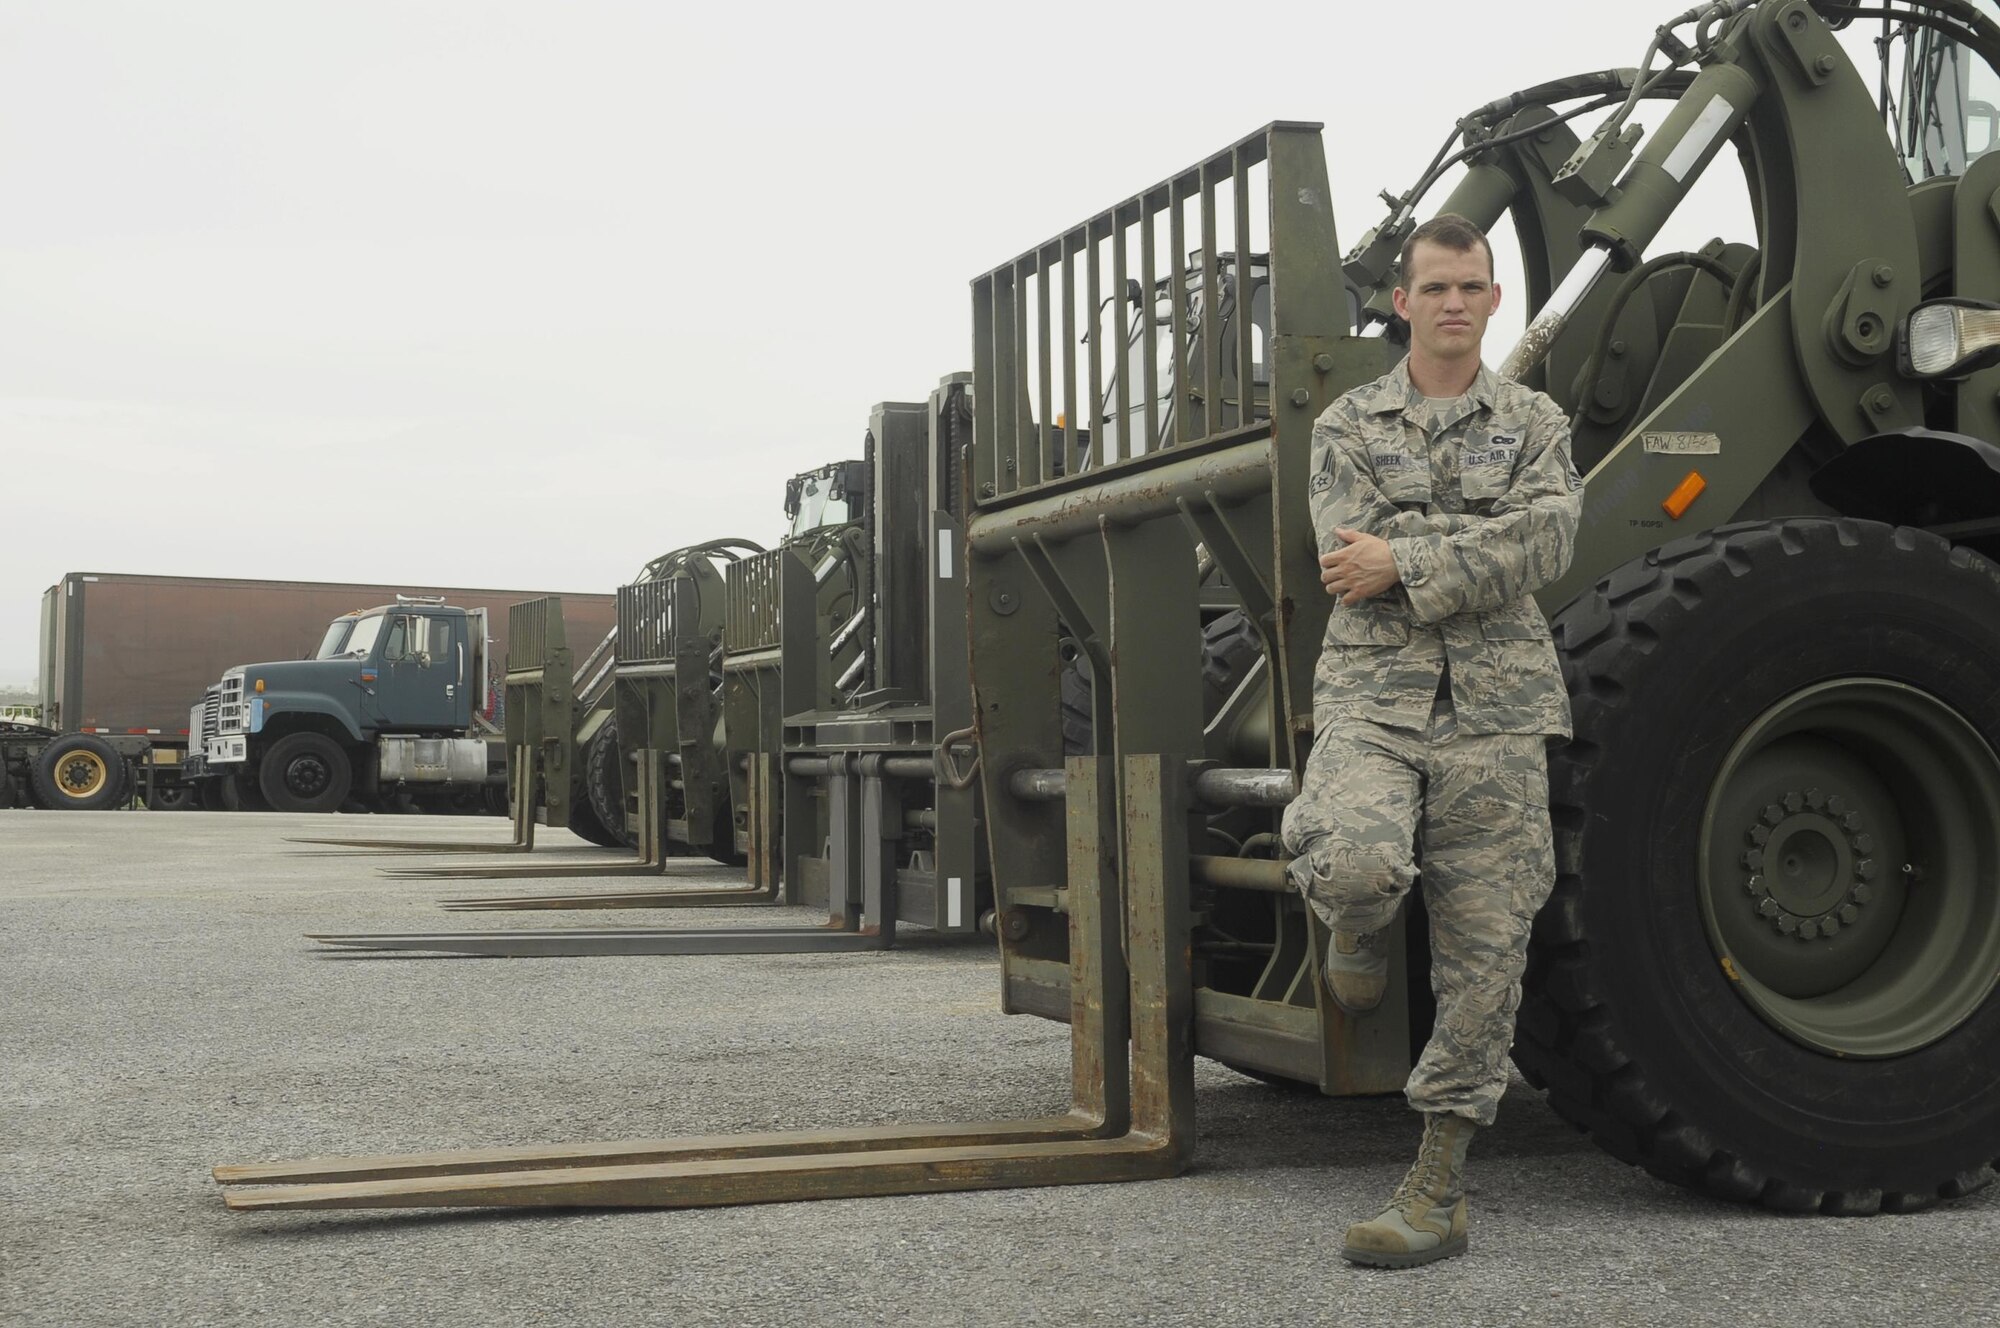 Senior Airman Chance Sheek, an 18th Logistics Readiness Squadron vehicle operations vehicle operator, stands next to forklifts he works with every day on Kadena Air Base, Japan, June 29, 2015. During the week, Sheek does anything from driving around distinguished visitors to loading trucks, but as a member of the Civil Air Patrol, he leads cadets through search and rescue exercises and teaches them skills like using compasses, land navigation, radio usage and basic medical skills (U.S. Air Force photo/Airman 1st Class Zackary A. Henry)